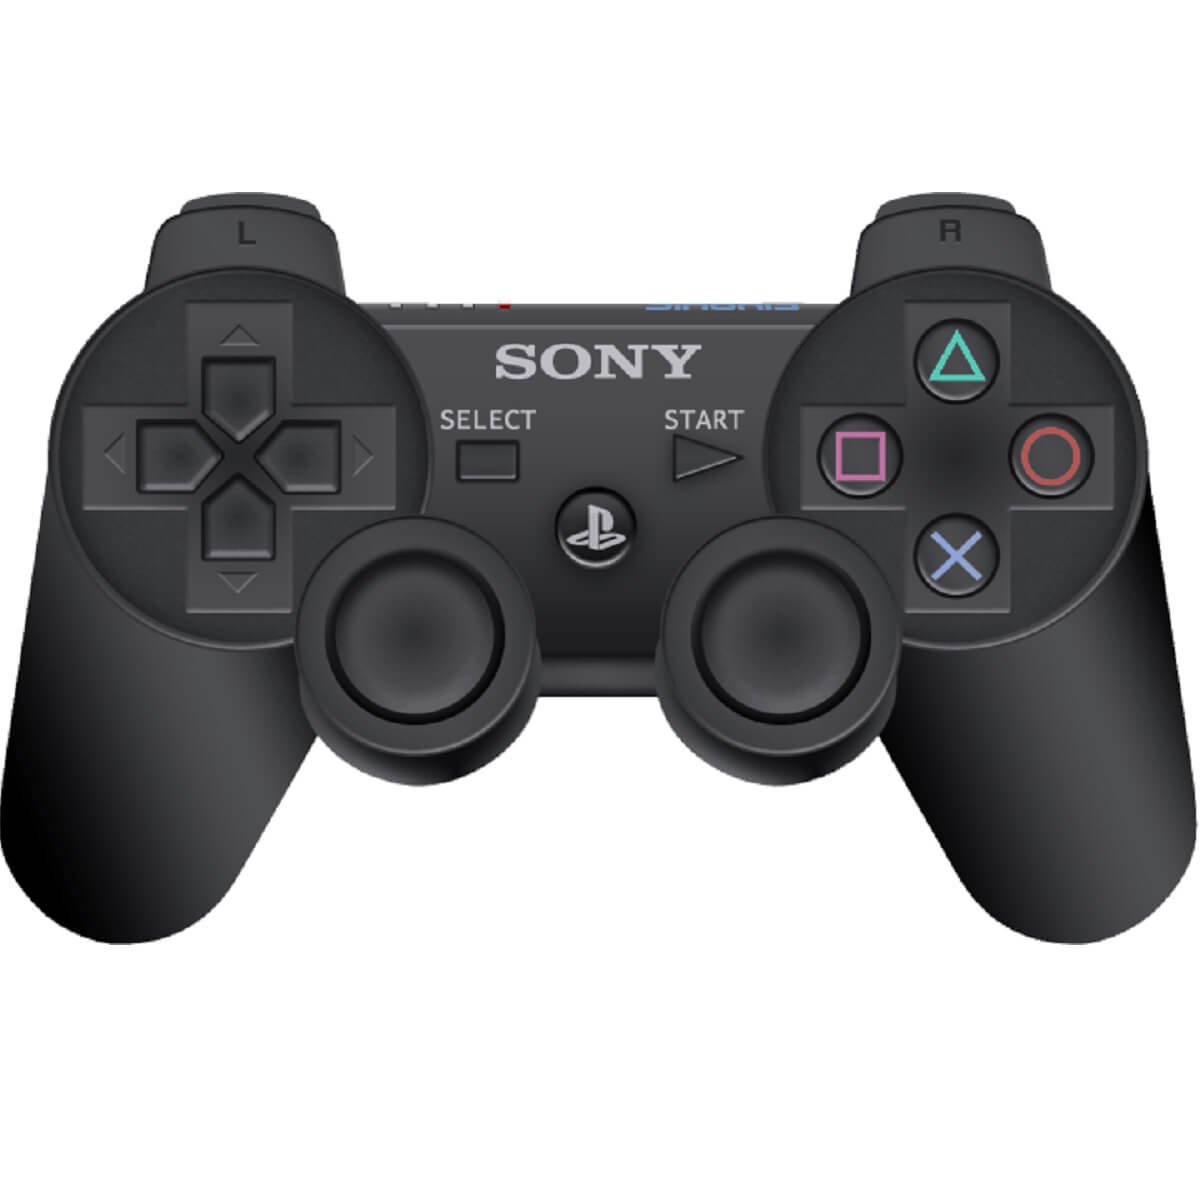 Playstation ps3 controller on windows 10